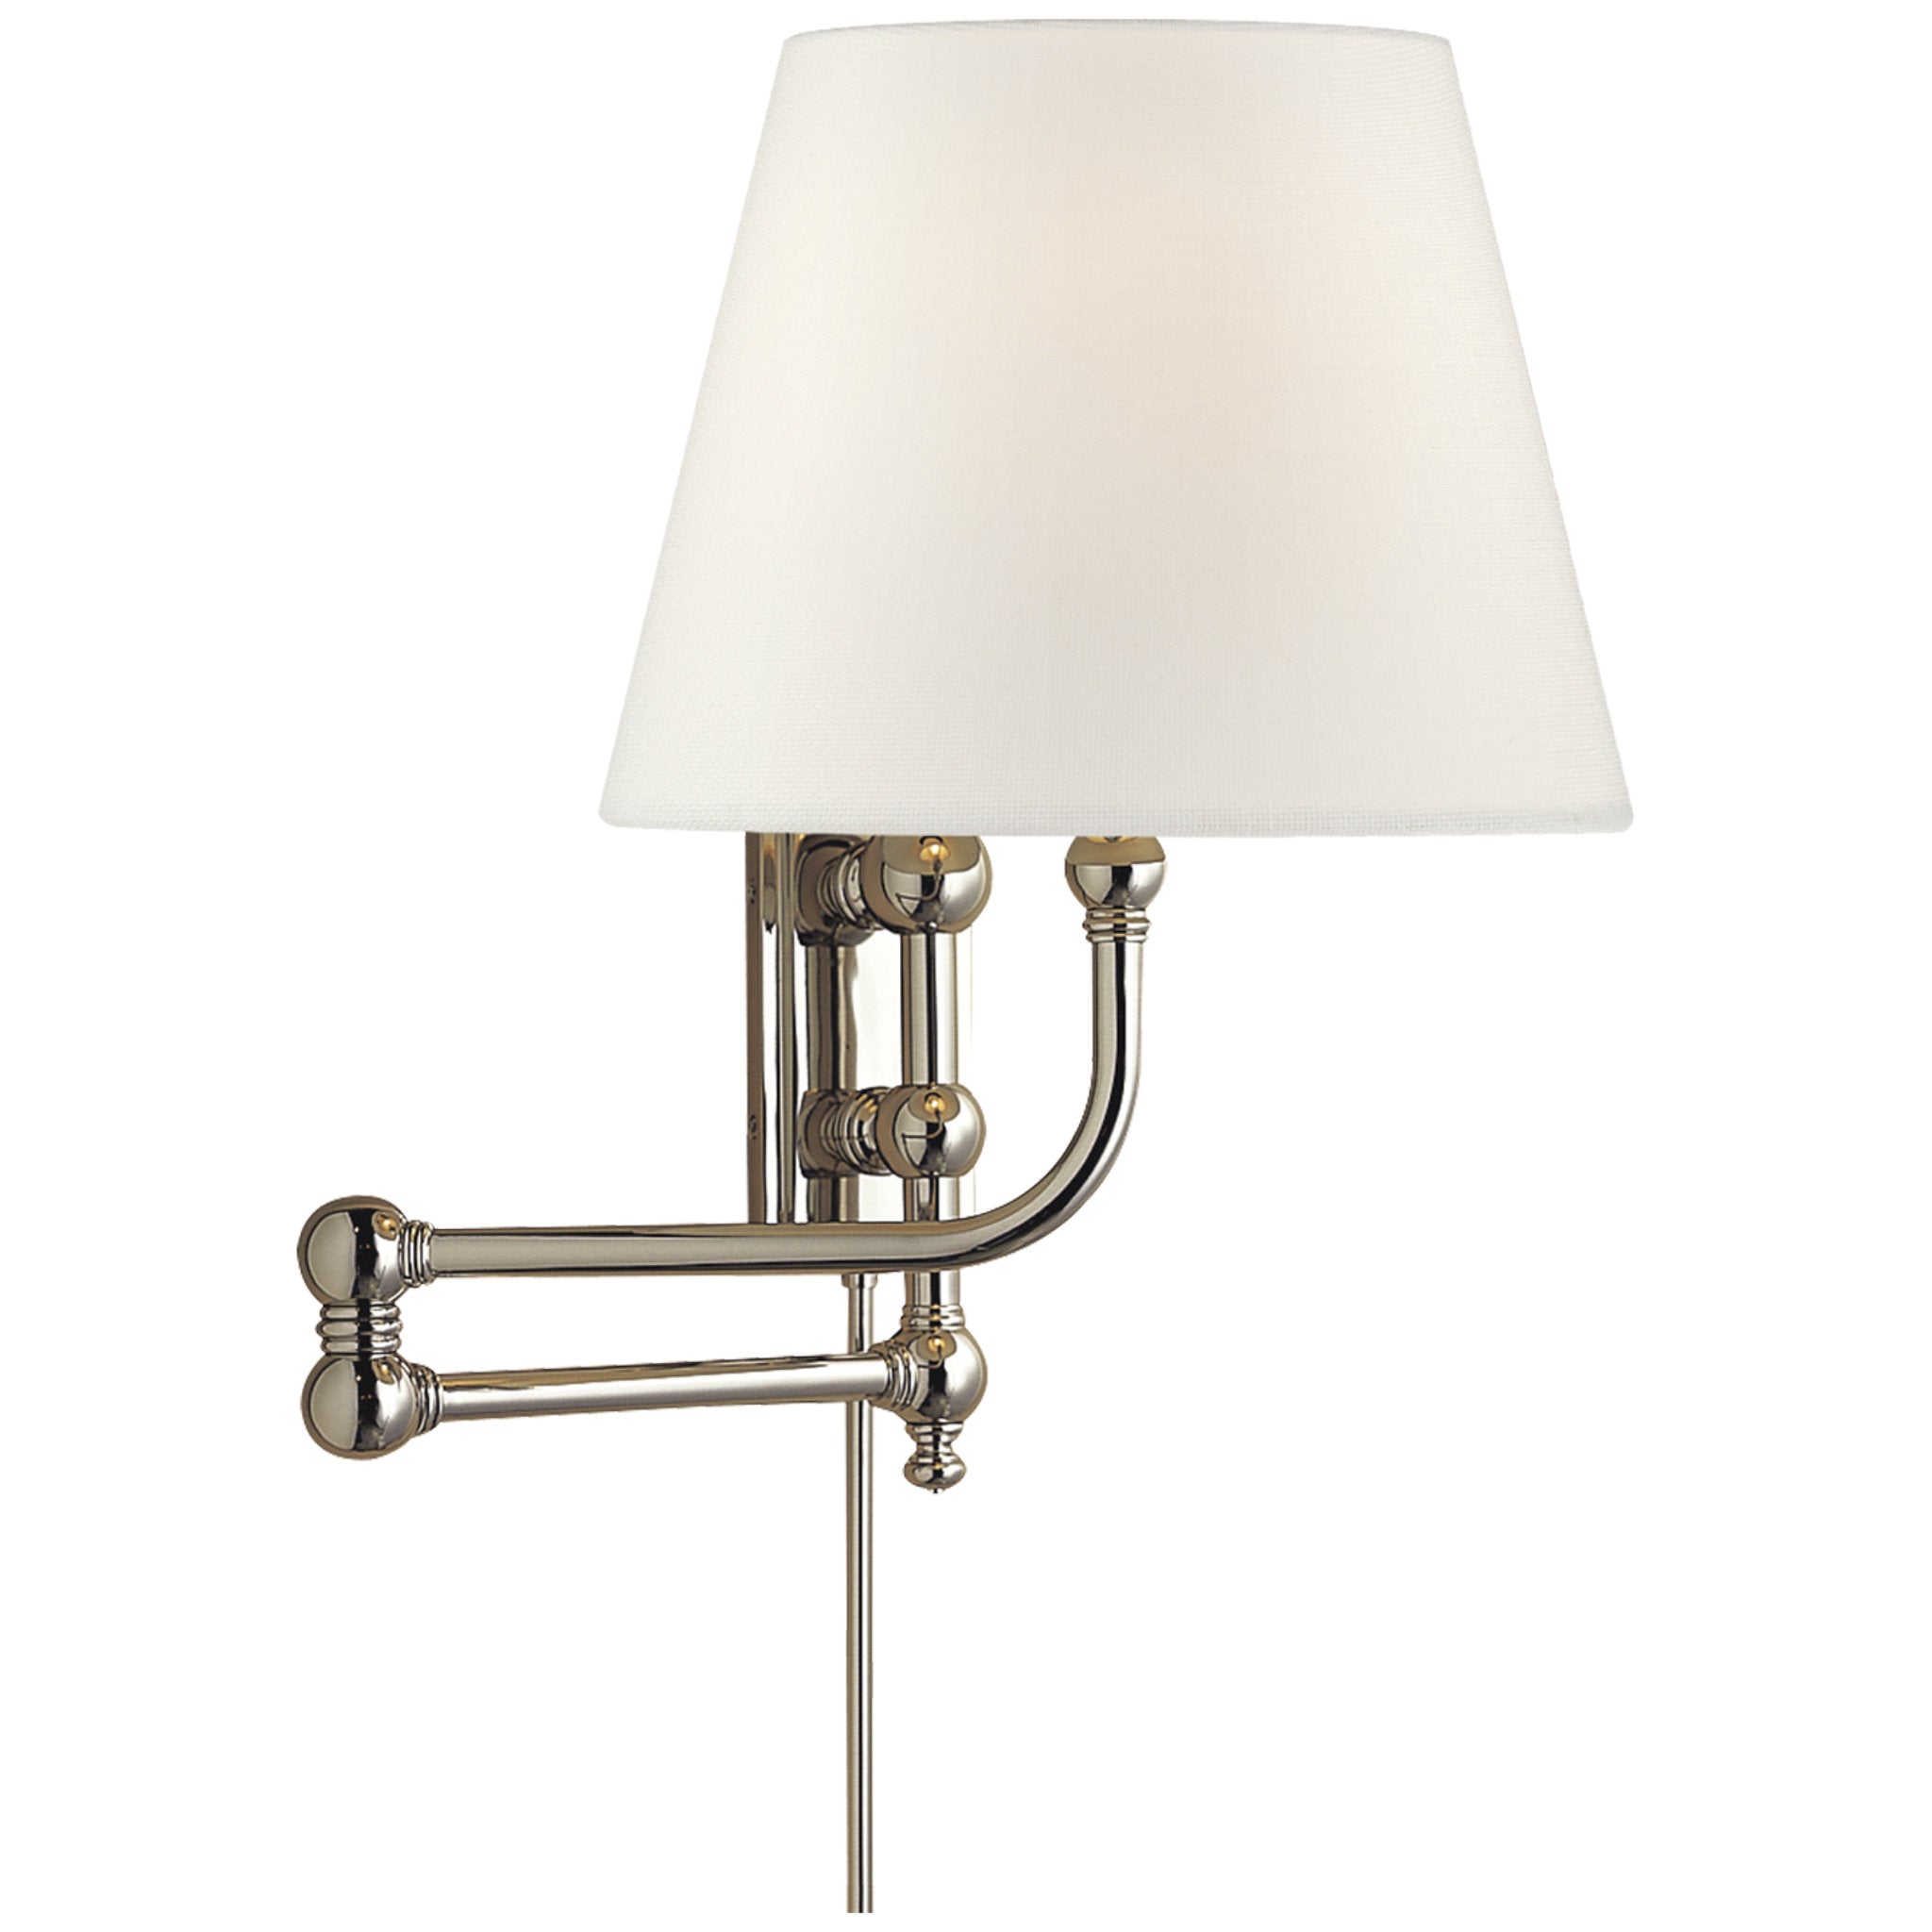 Chapman & Myers Pimlico Swing Arm in Polished Nickel with Linen Shade